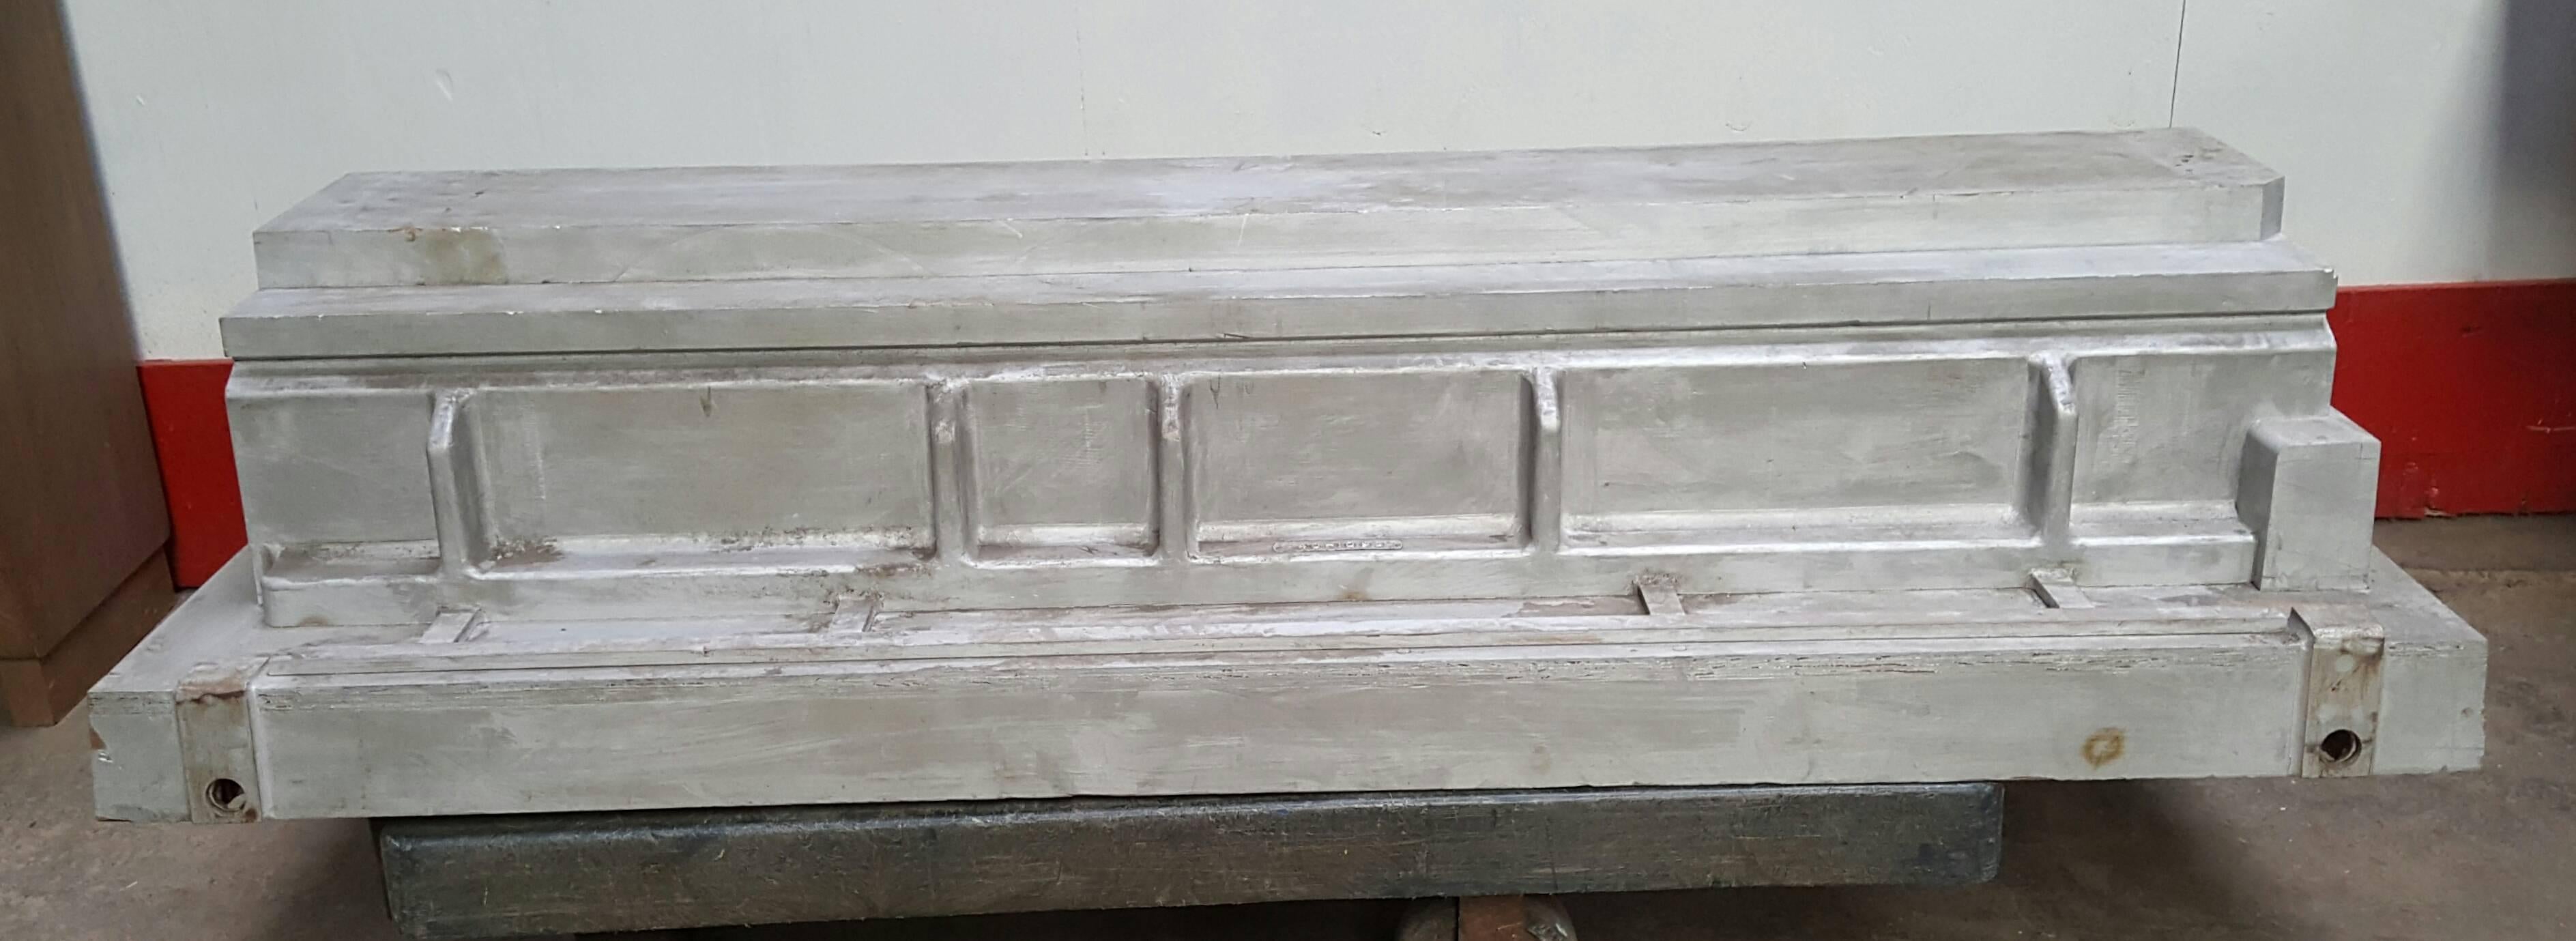 Painted 1930s Architectural Silvered Foundry Form Mold Casting Coffee Table Garden For Sale